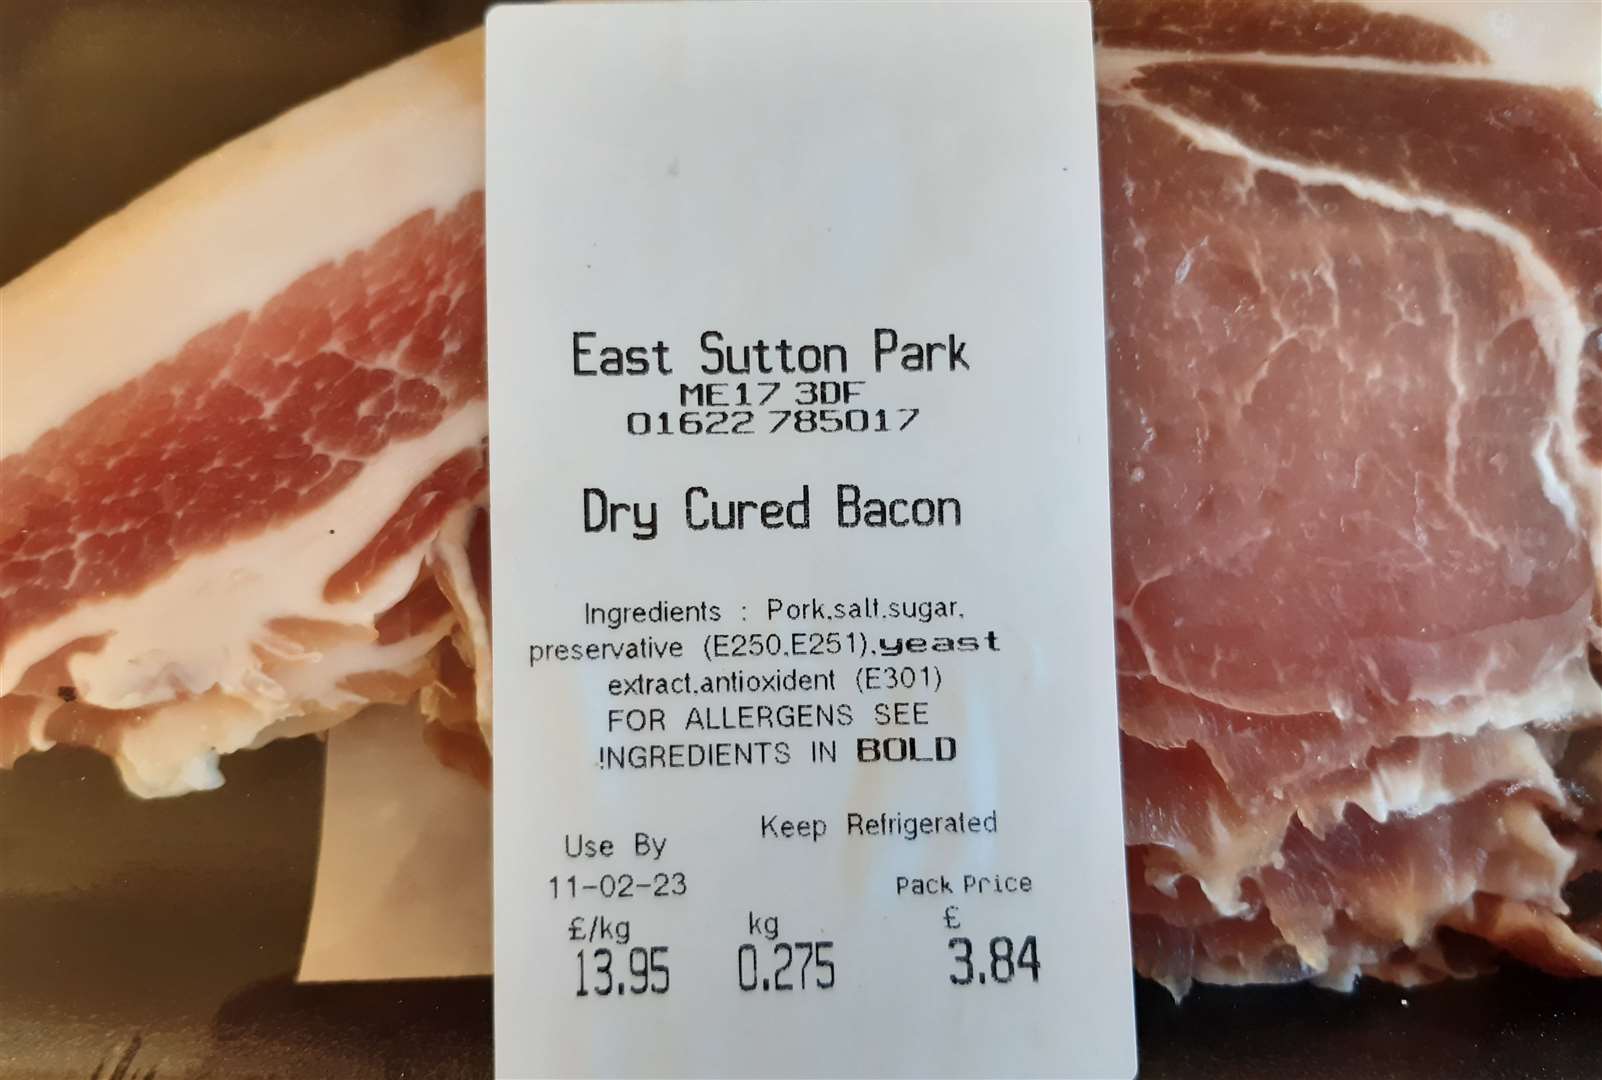 The bacon rashers were from East Sutton Park Prison and Young Offender Institution in Maidstone, costing £3.84